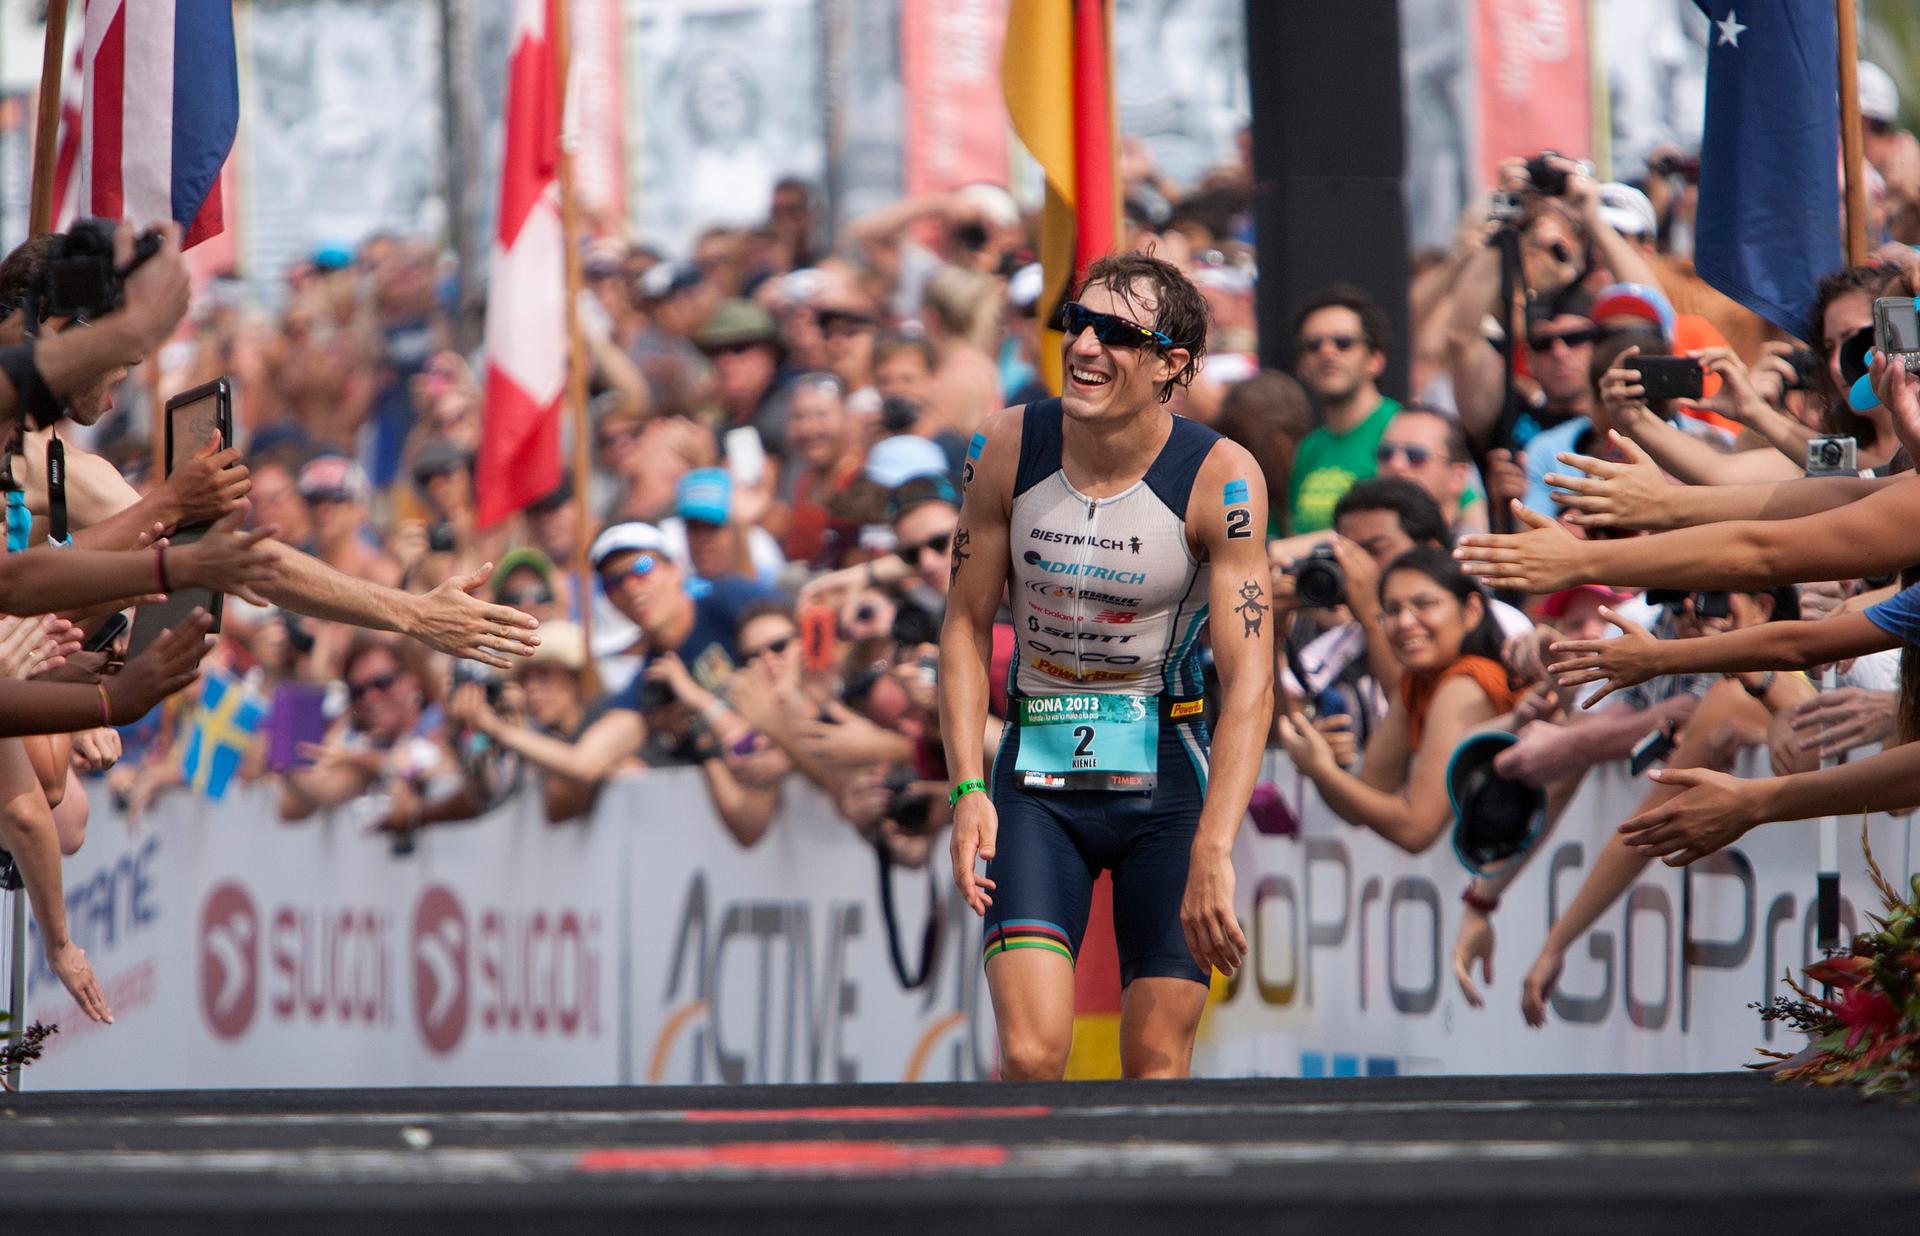 Triathlete Sebastian Kienle of Germany reacts to the crowd after coming in third place at the Ironman World Championship in Kailua-Kona, Hawaii, October 12, 2013